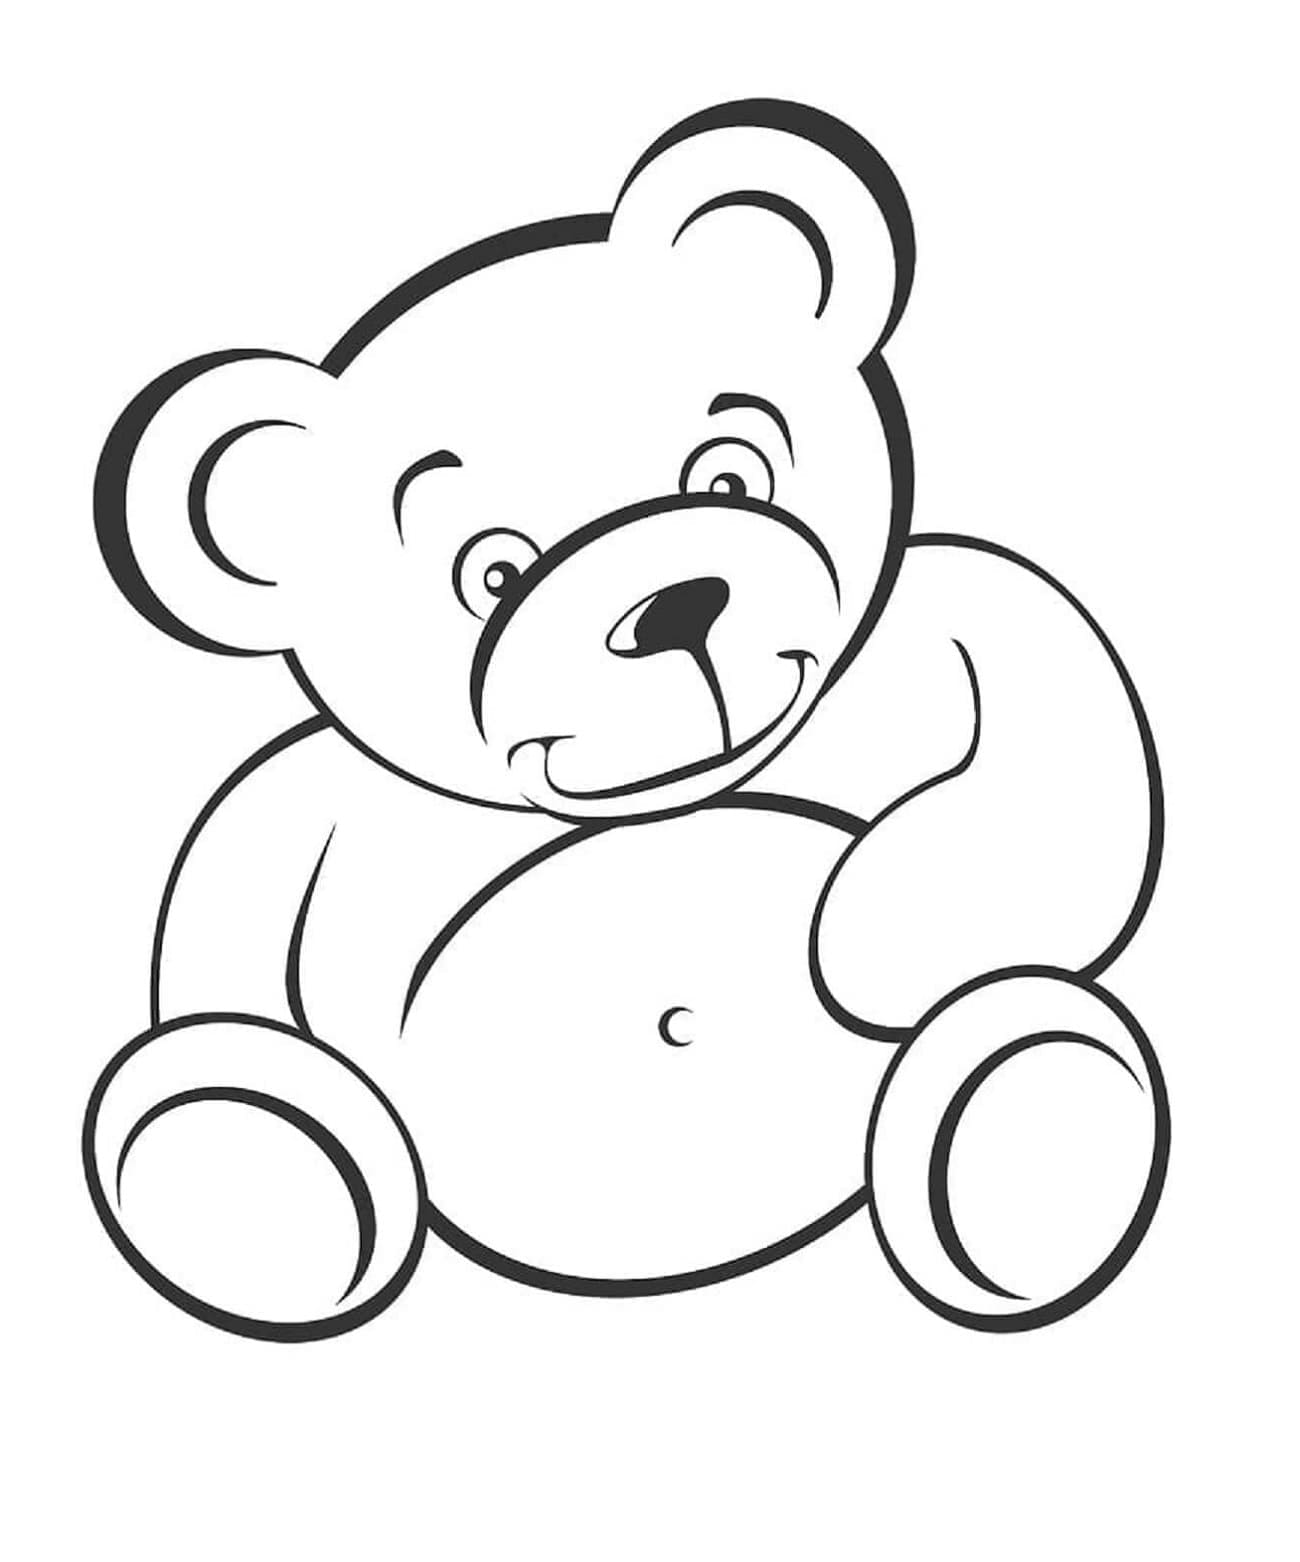 Printable Smiling Easy Teddy Bear Coloring Page